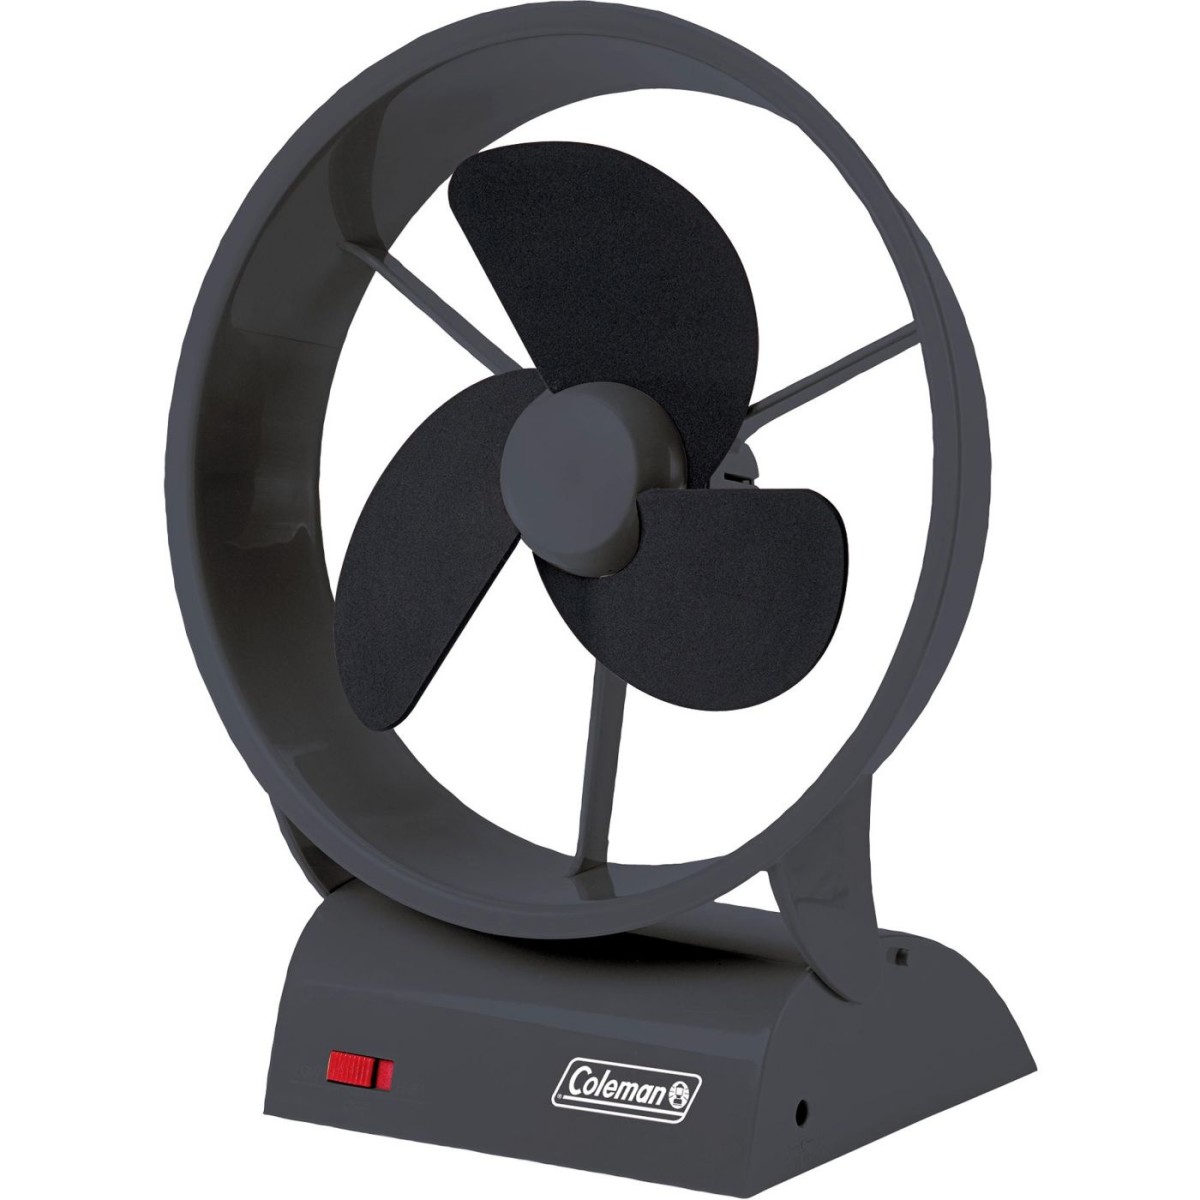 Get a great range of fans and cooling products from Fishpond. Cheaper than Amazon and free shipping!